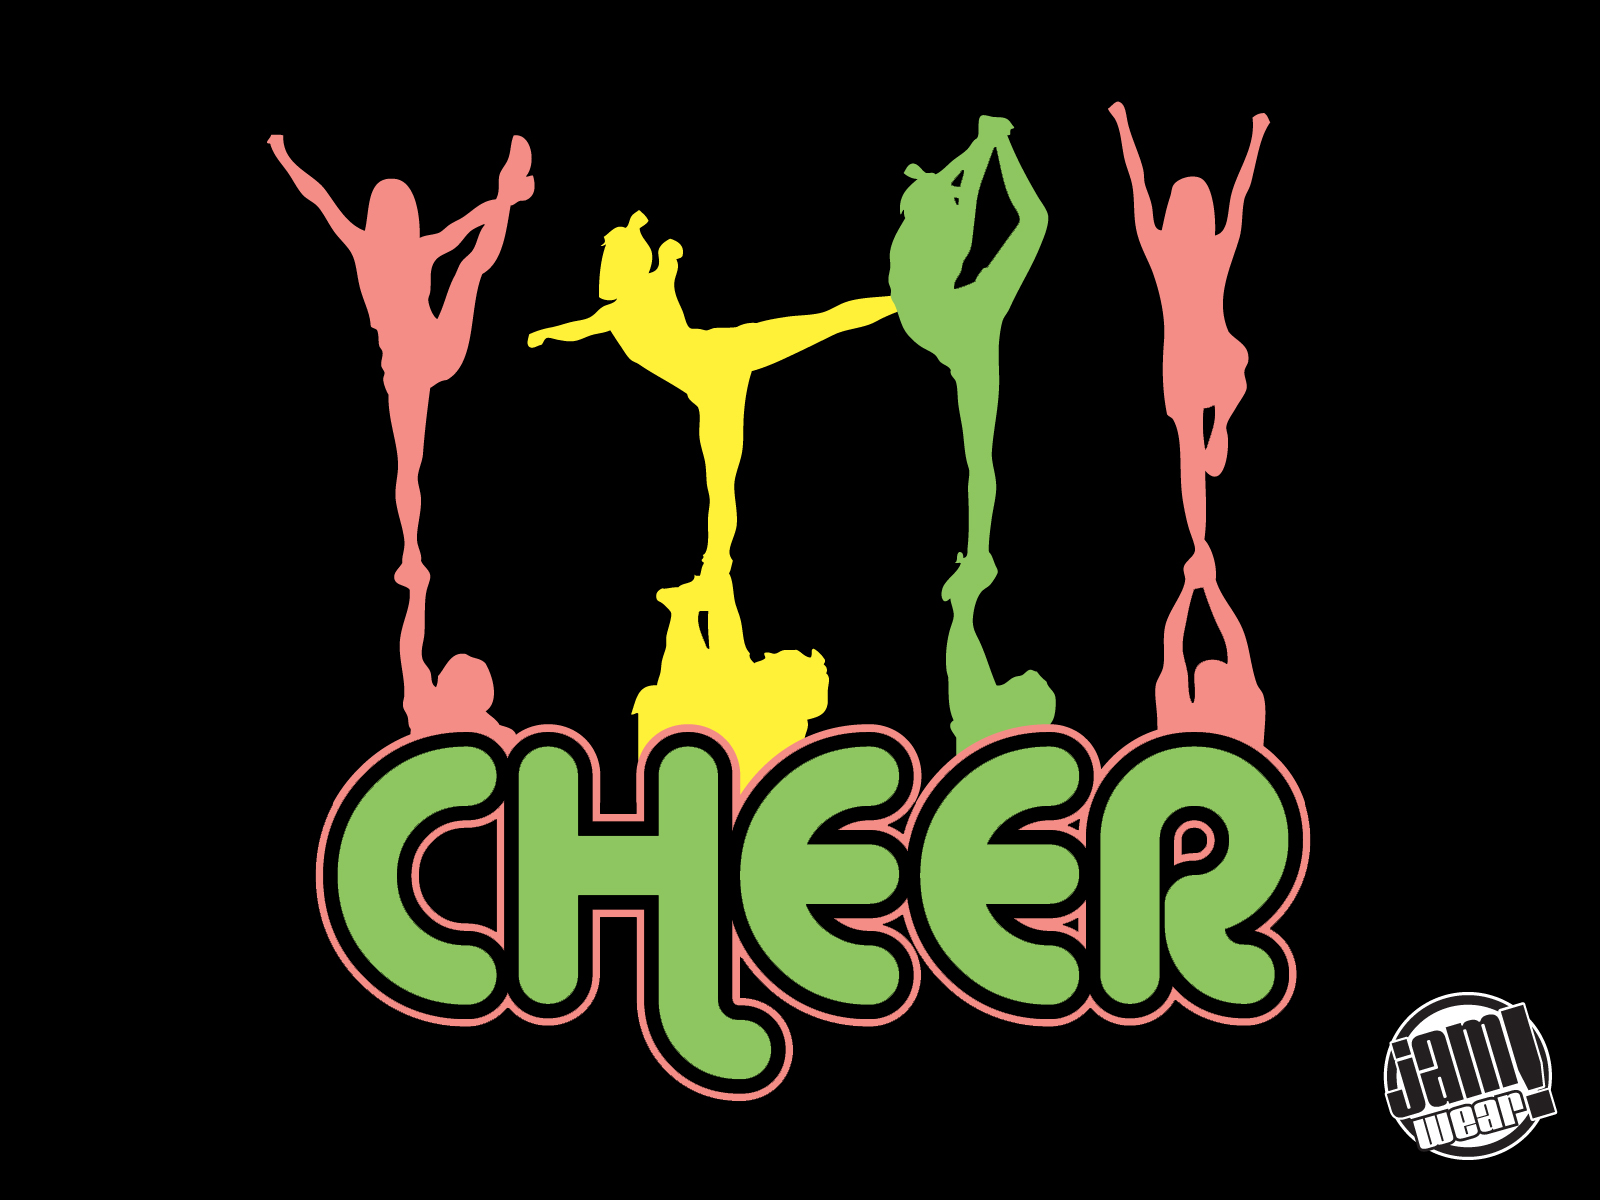 Elementary Cheer Camp Cheerleading Stunt Silhouette PNG Image With  Transparent Background  TOPpng